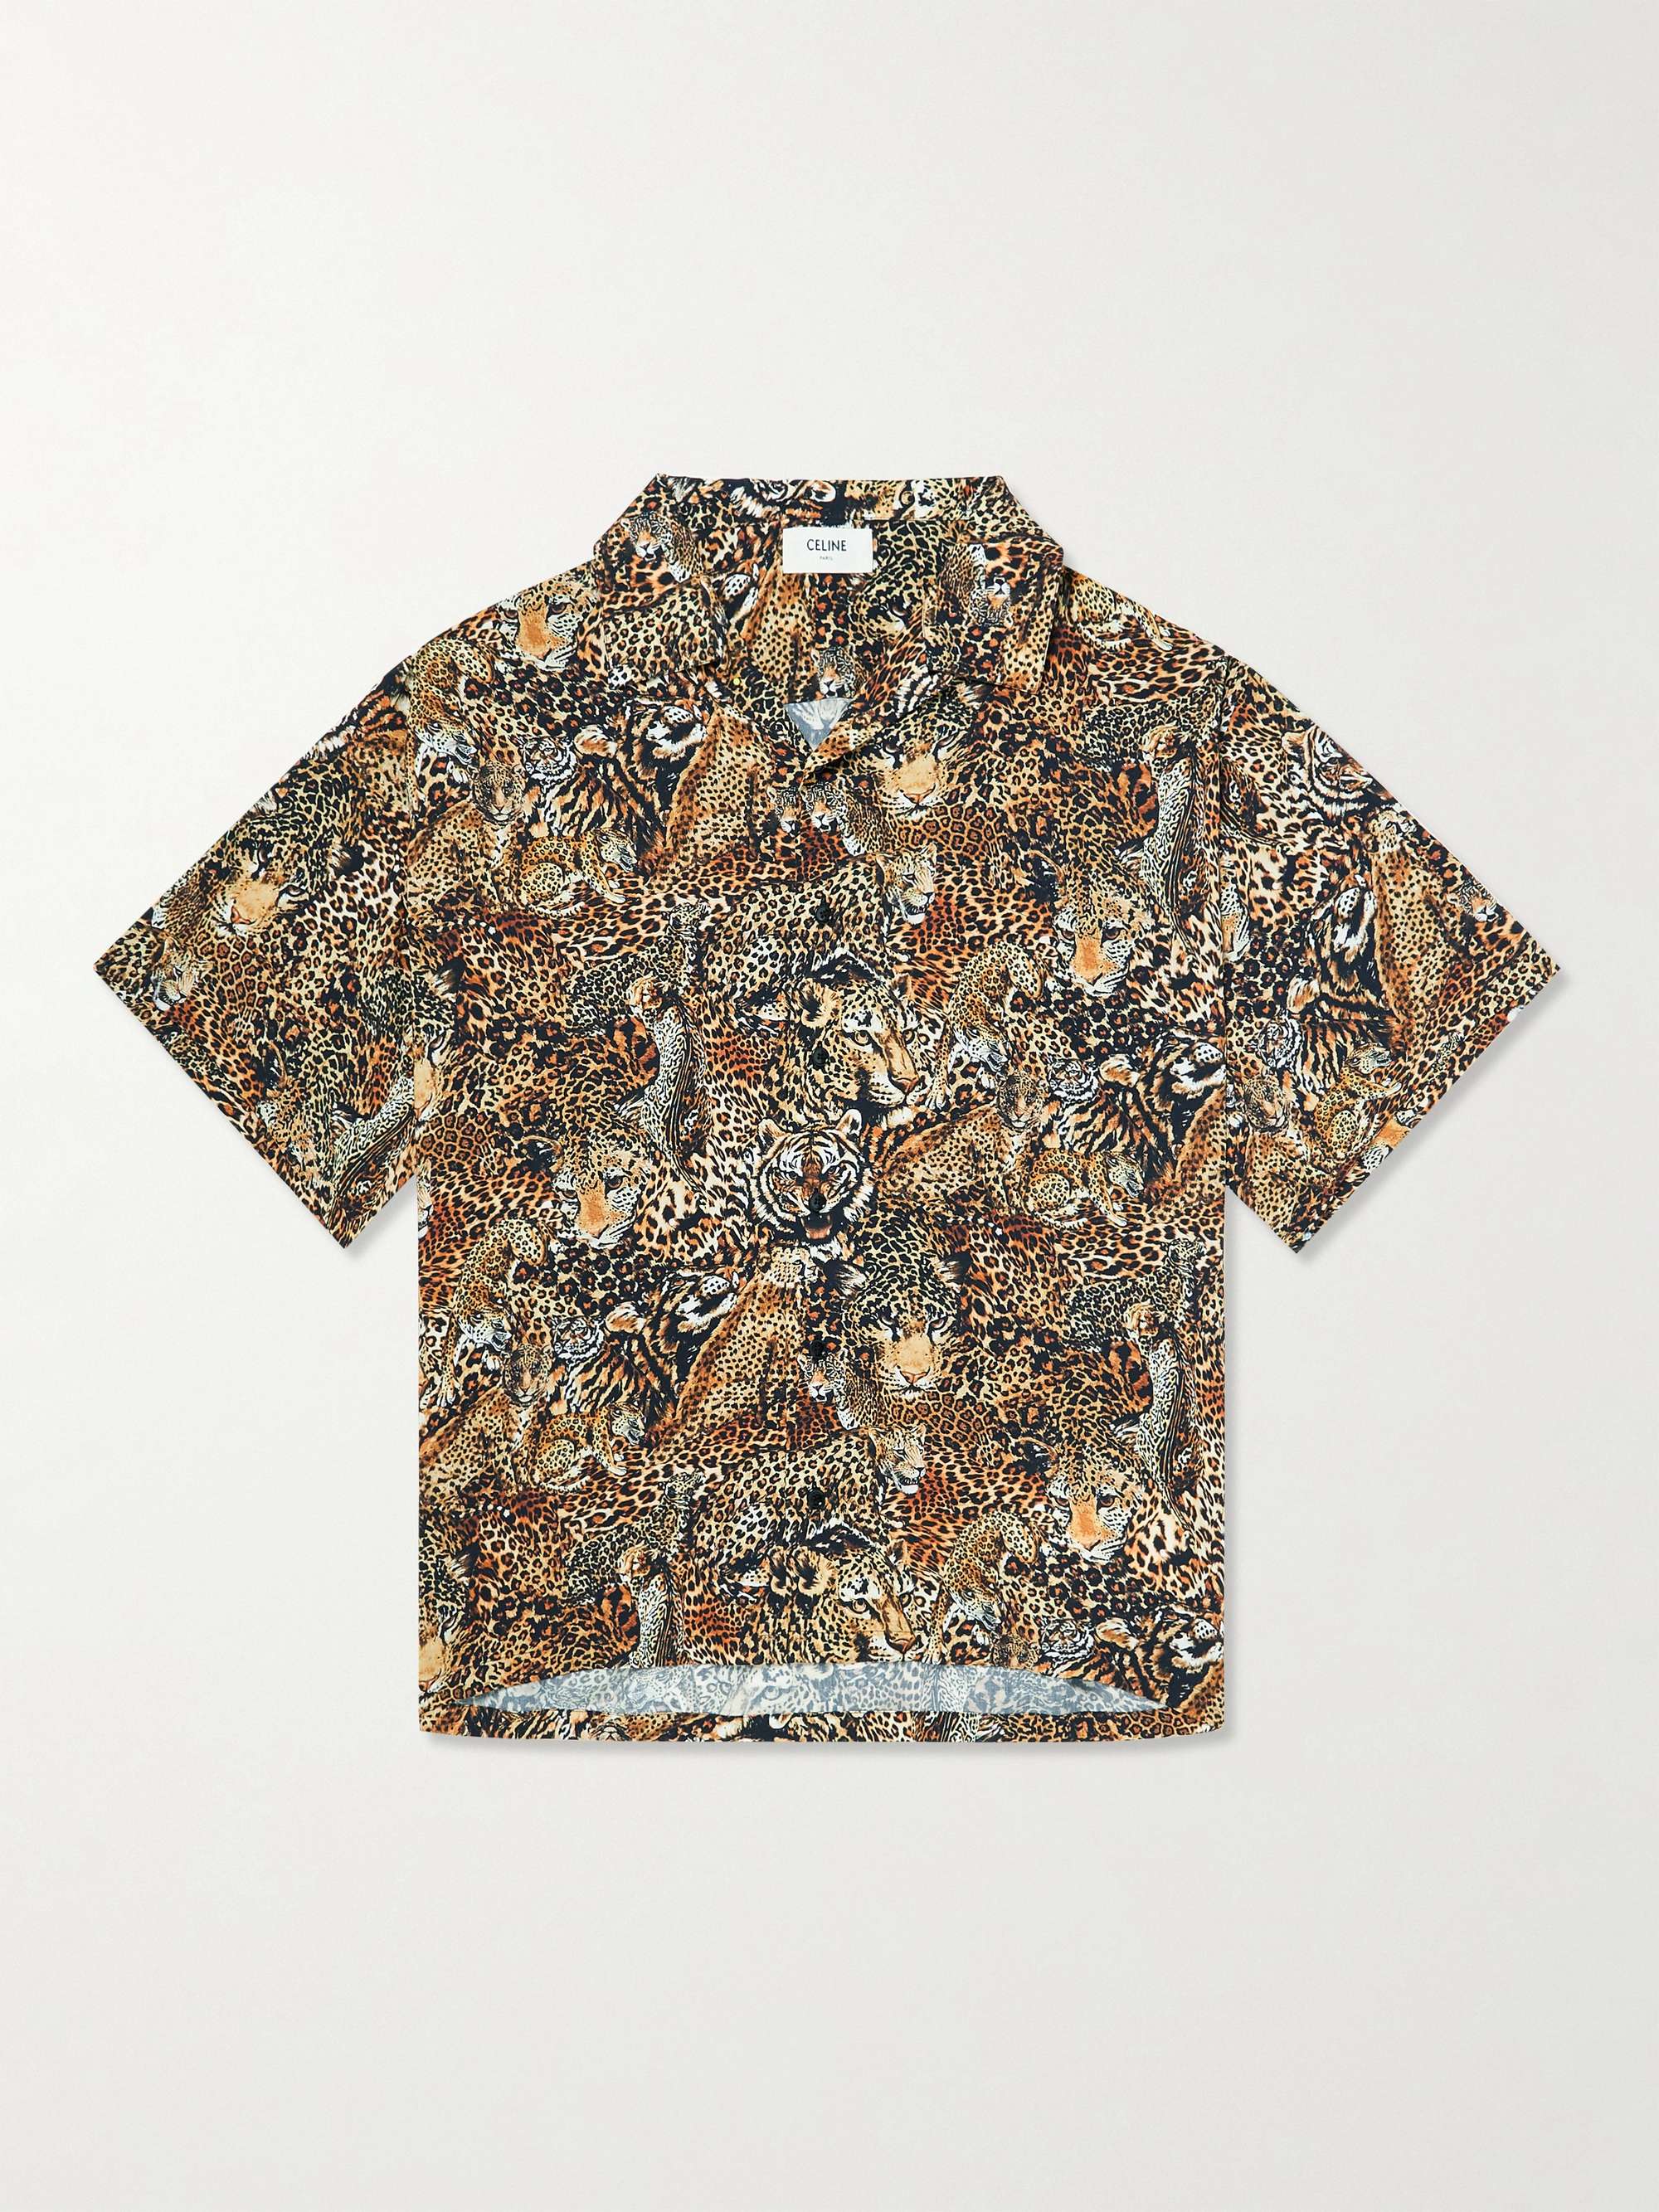 CELINE HOMME Camp-Collar Printed Voile Shirt